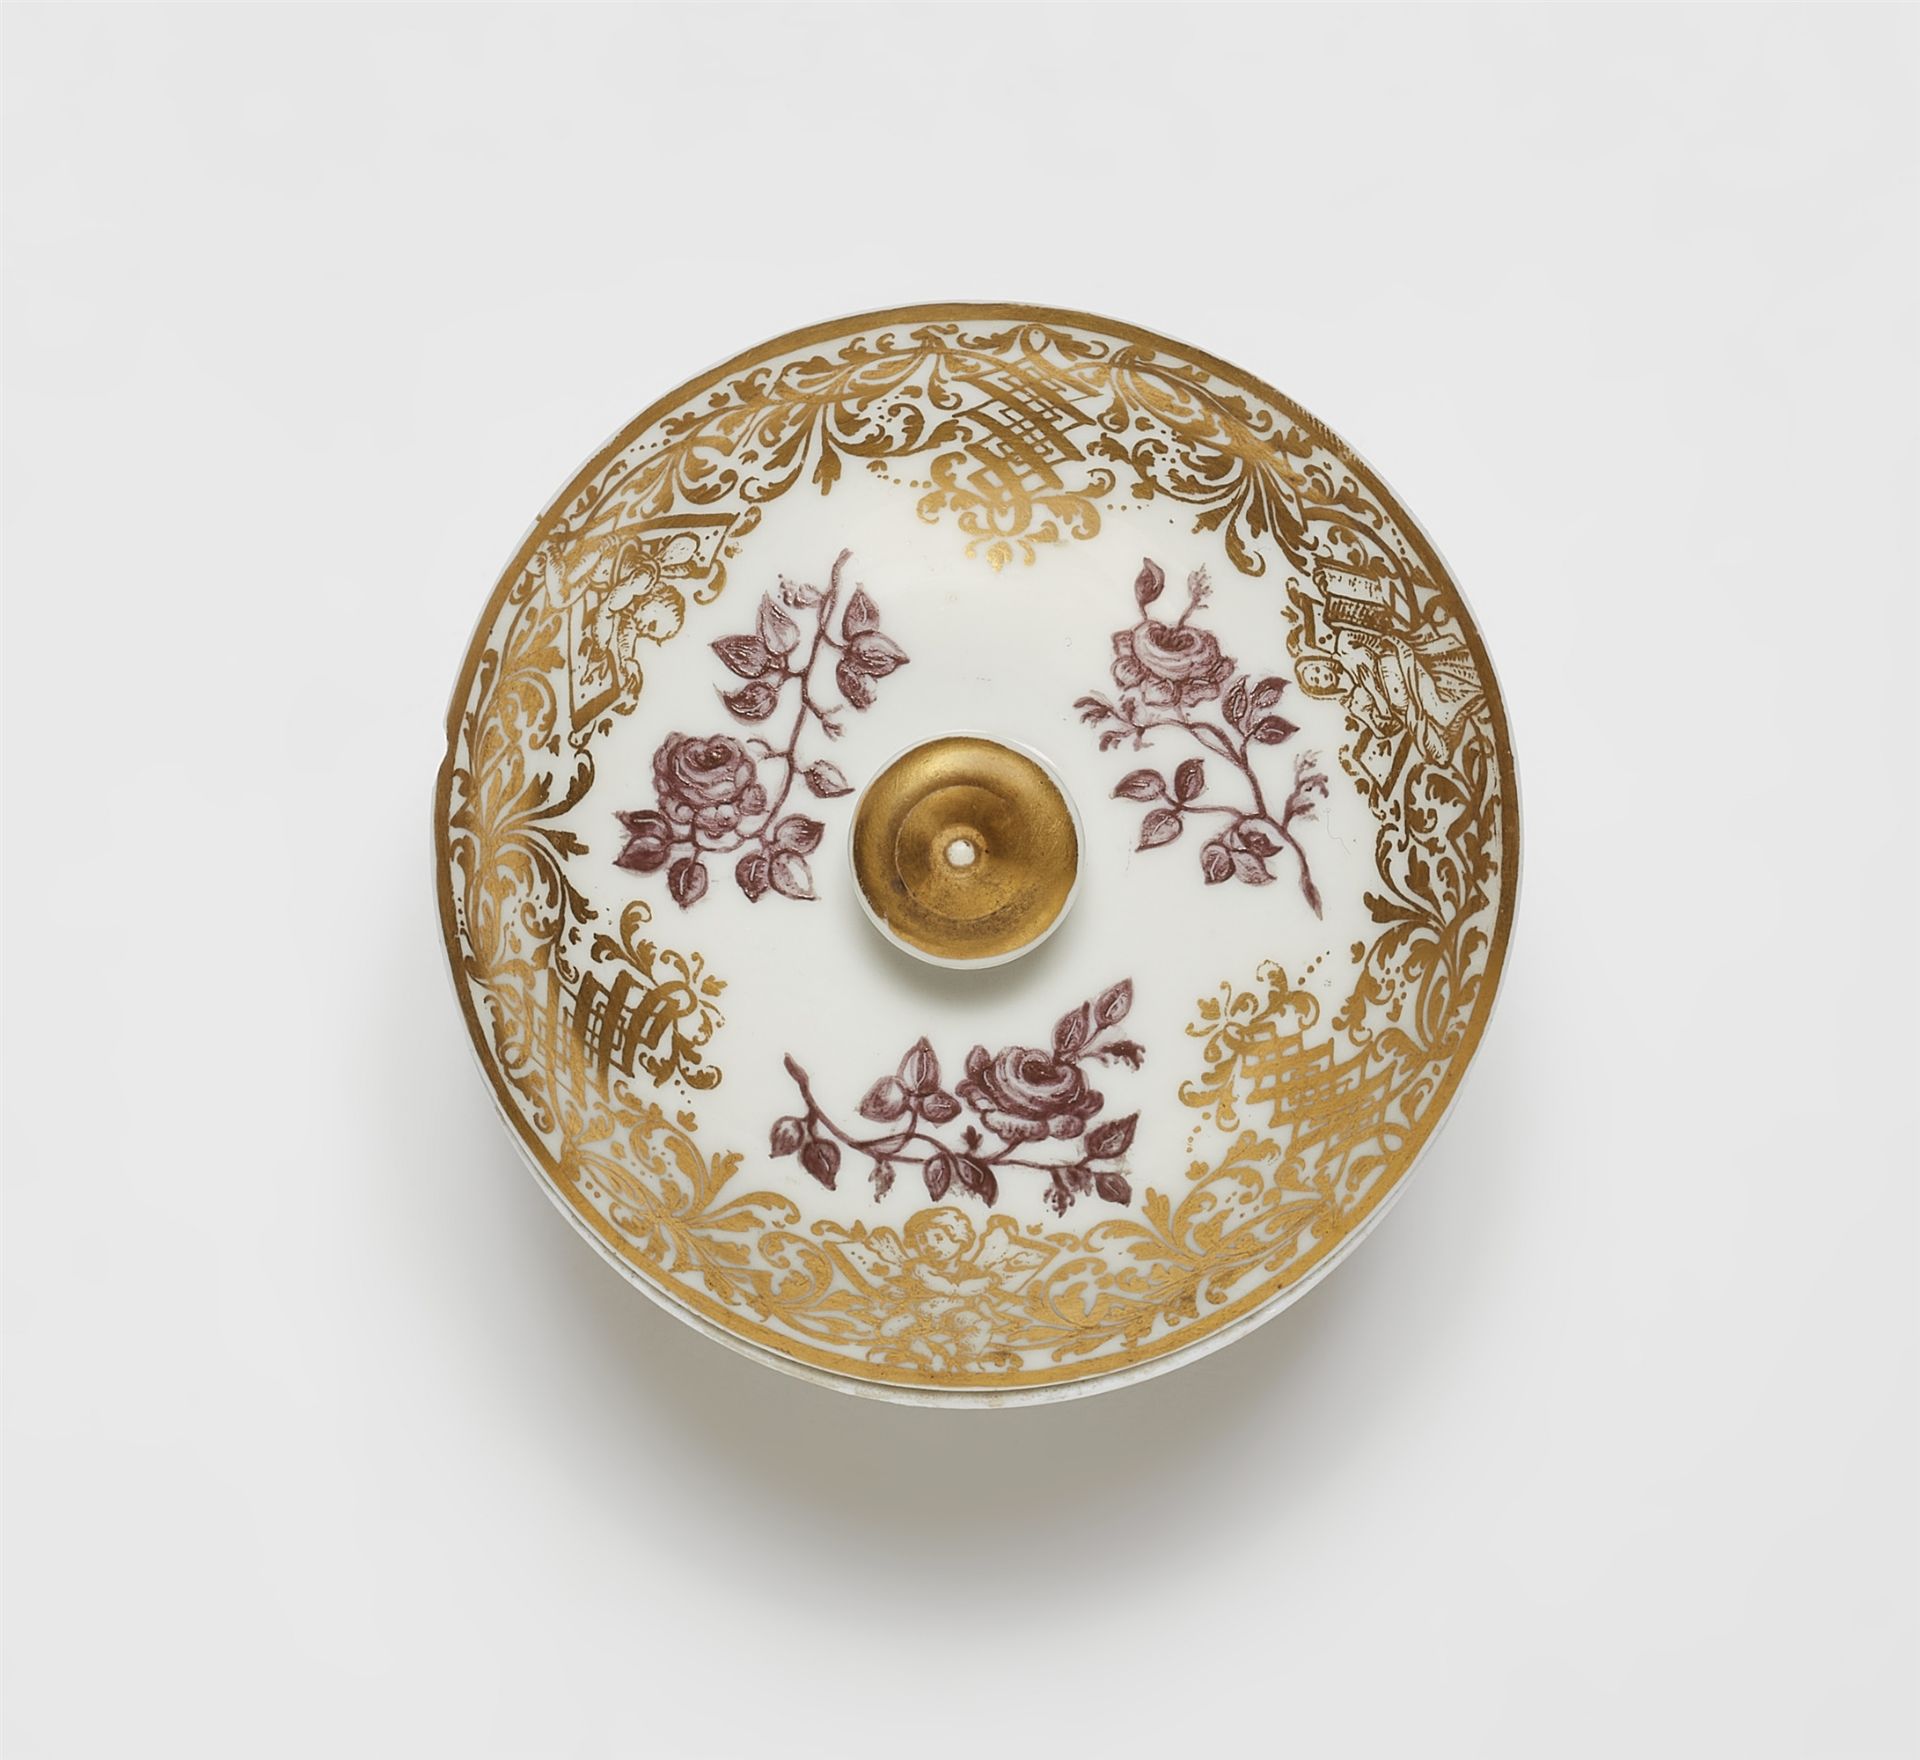 A Meissen porcelain dish and cover with landscape decor - Image 3 of 5